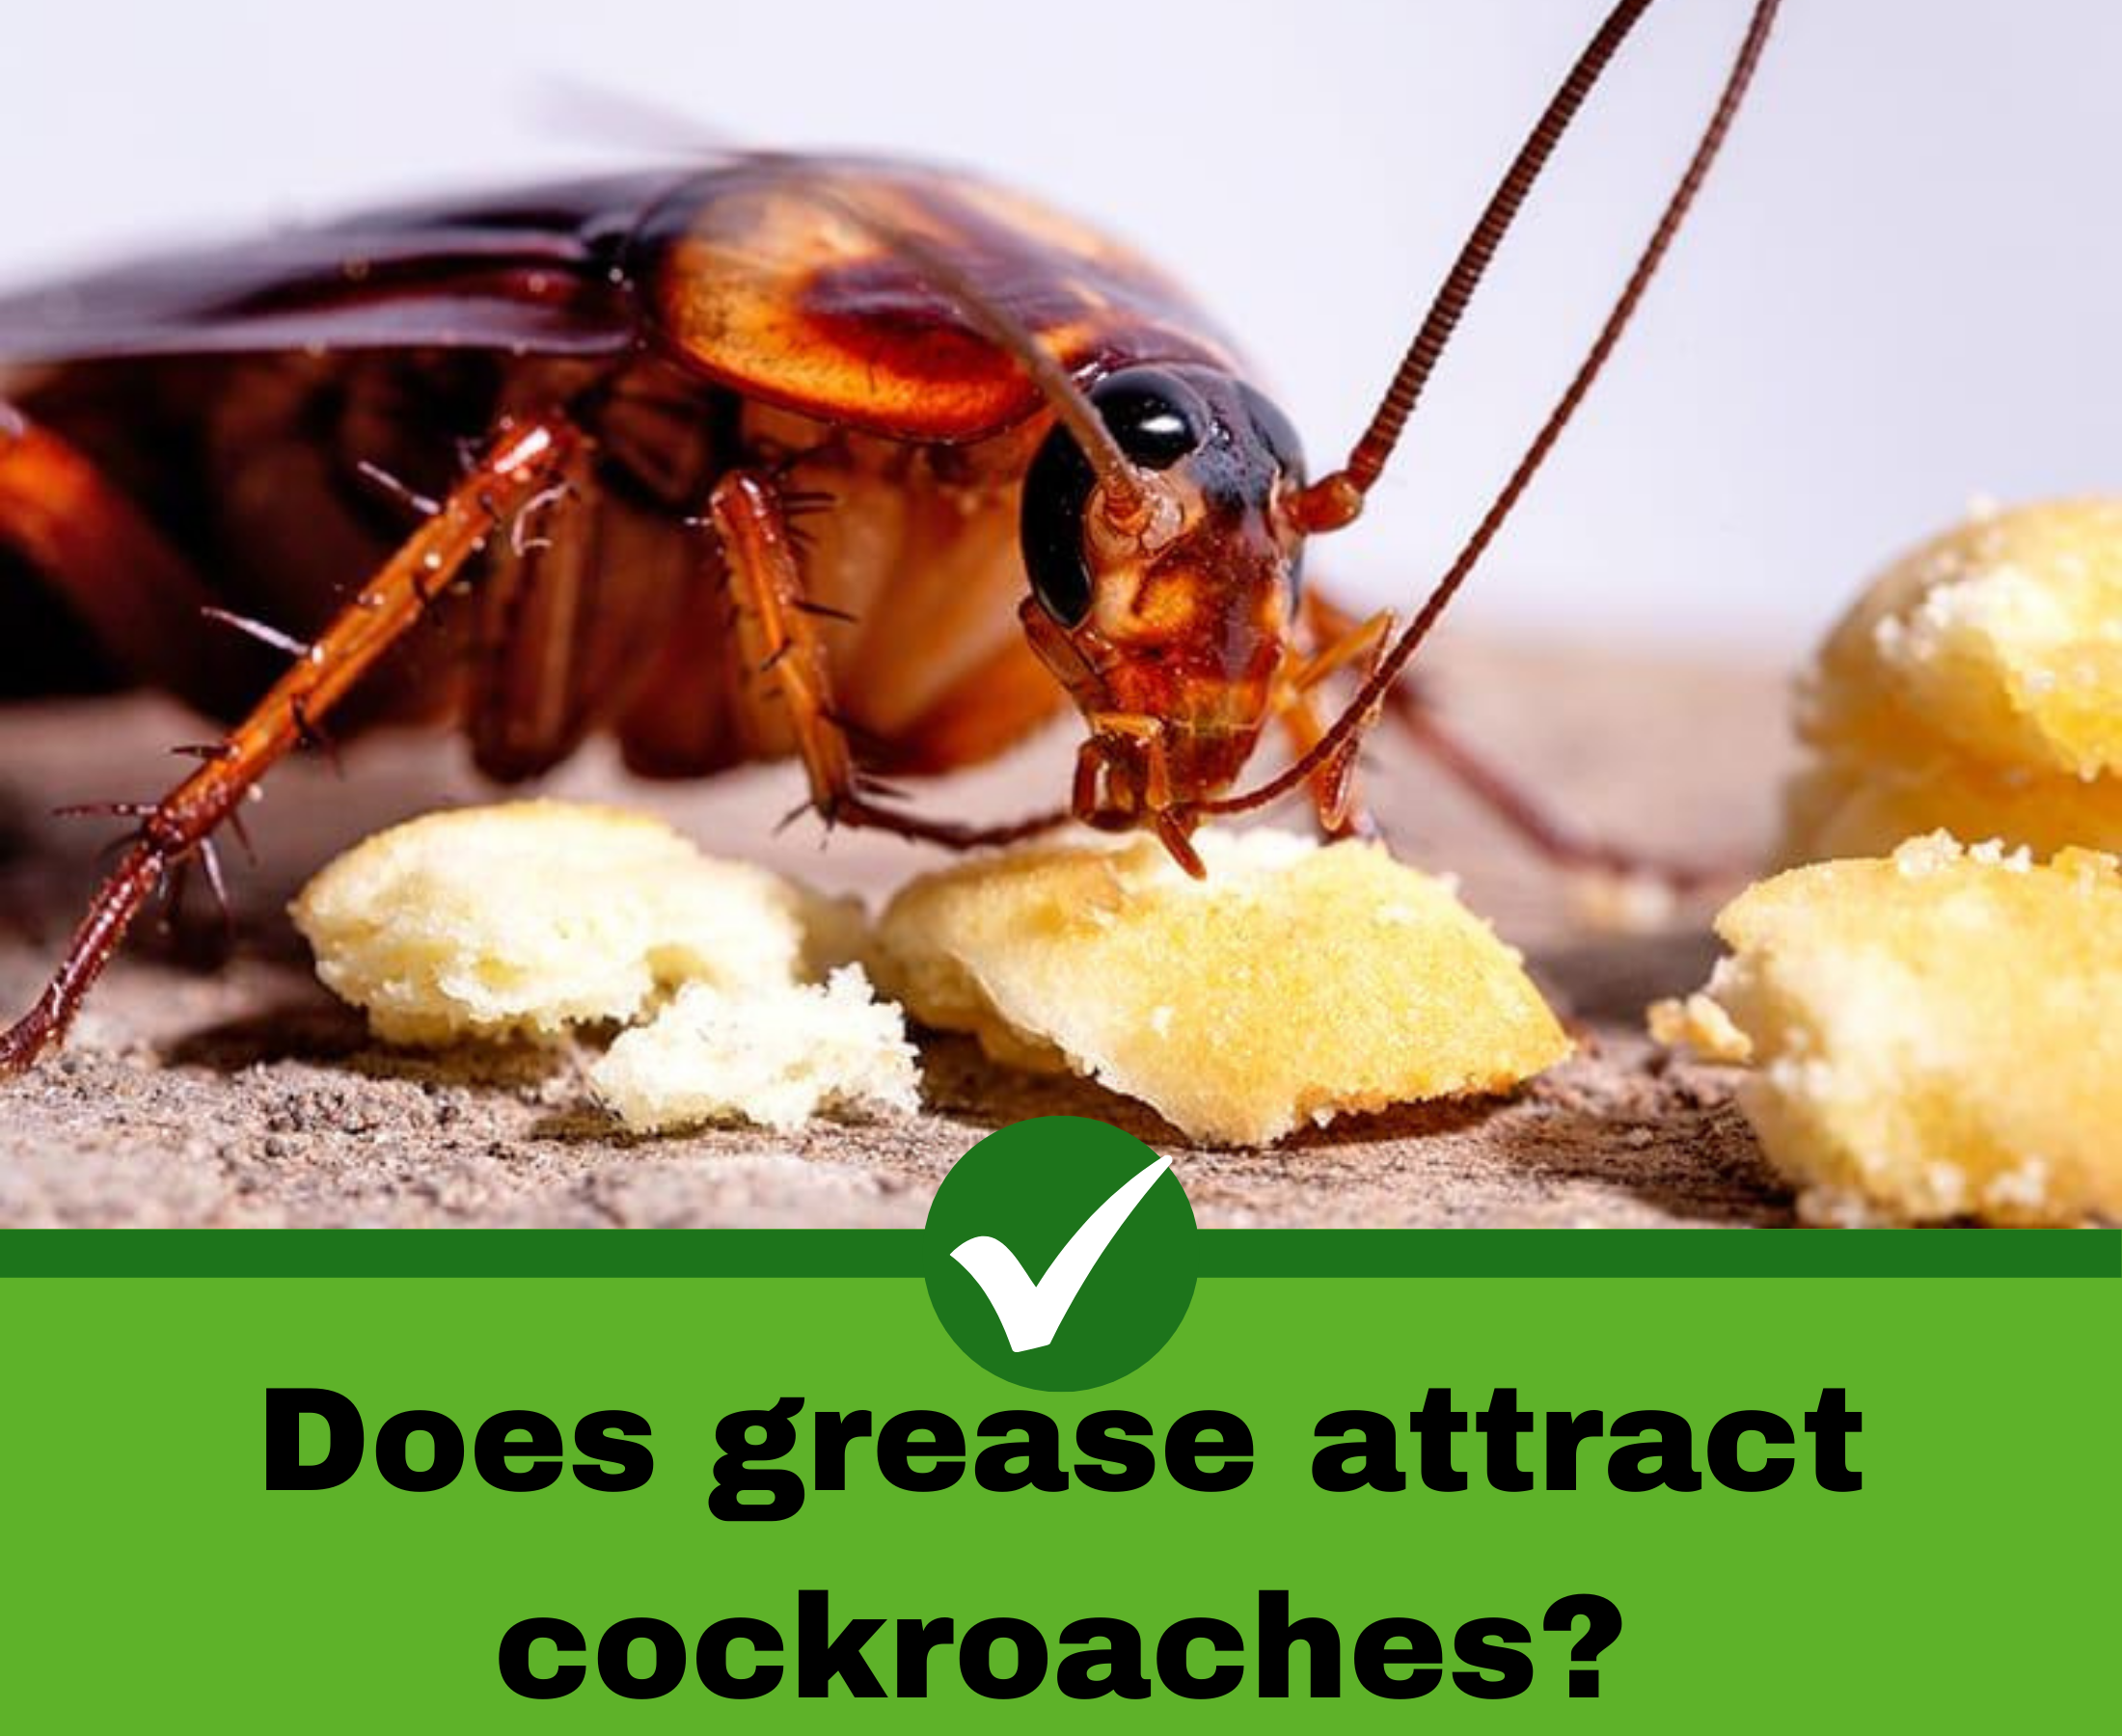 Cockroaches cut sweets — thus baits — out of their diets